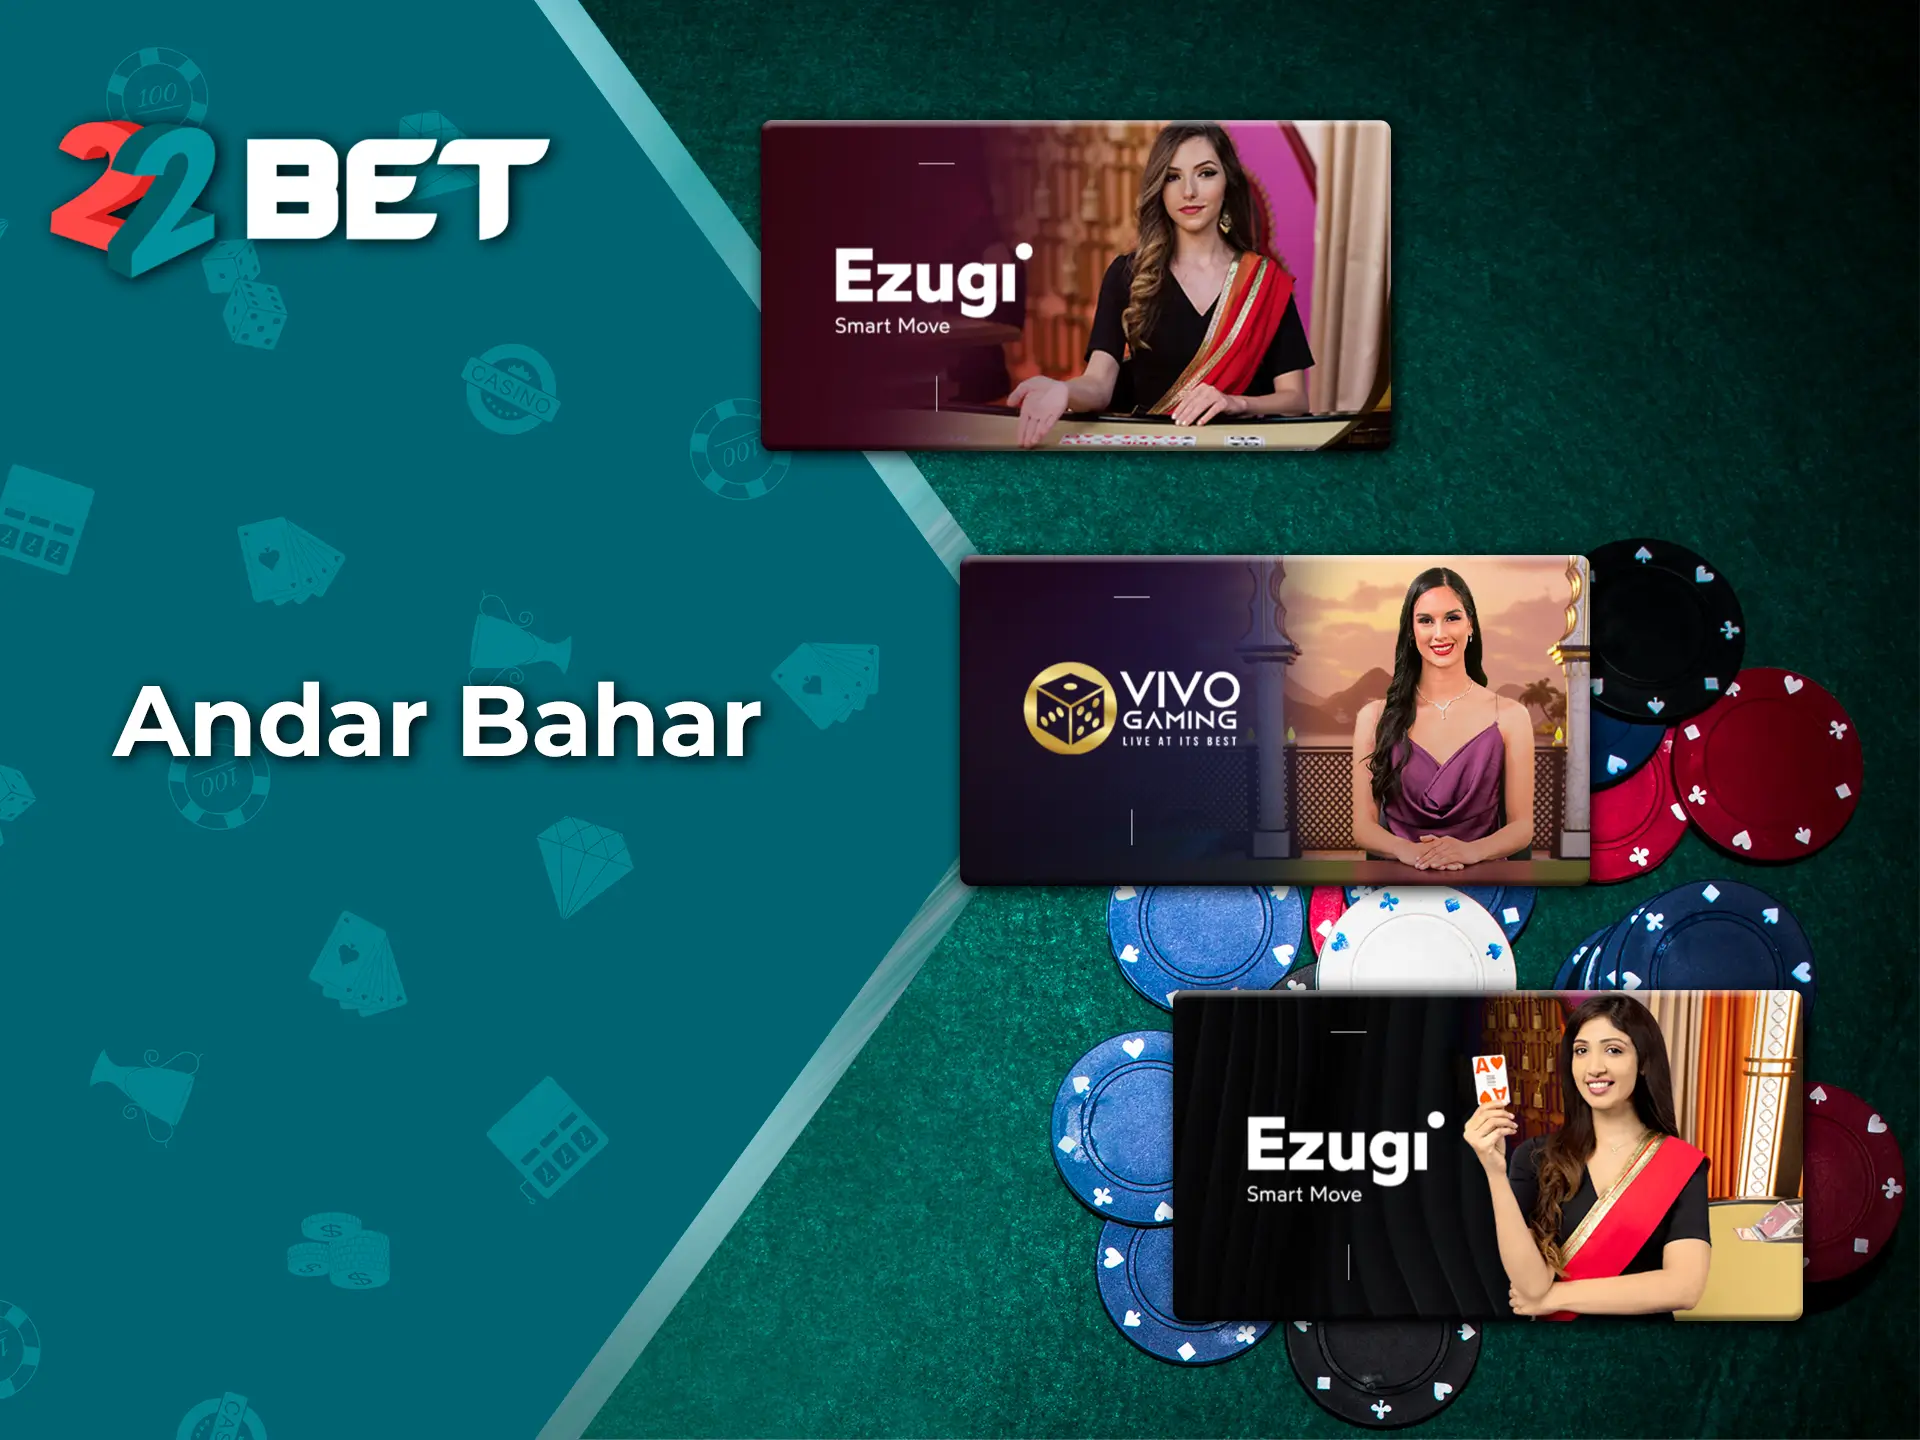 Andar Bahar is a popular game from 22Bet that allows players to win big money.